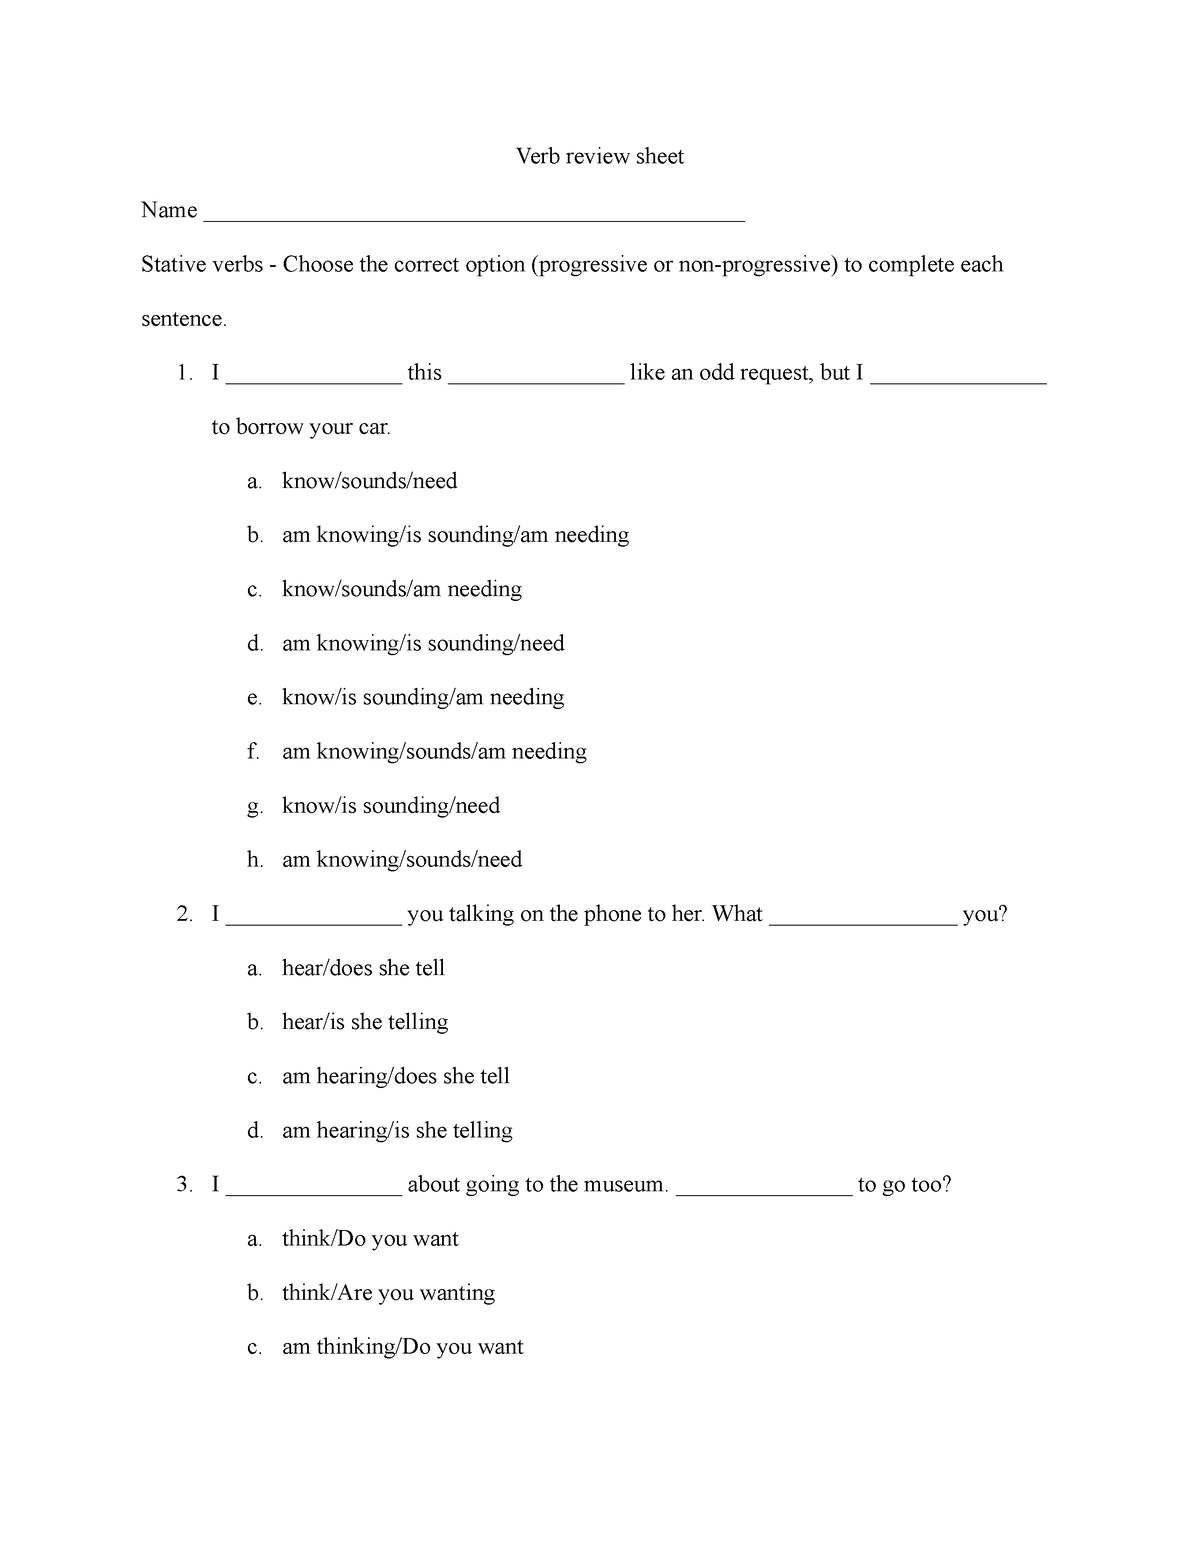 Verb review sheet - exercise in English practice - Verb review sheet ...